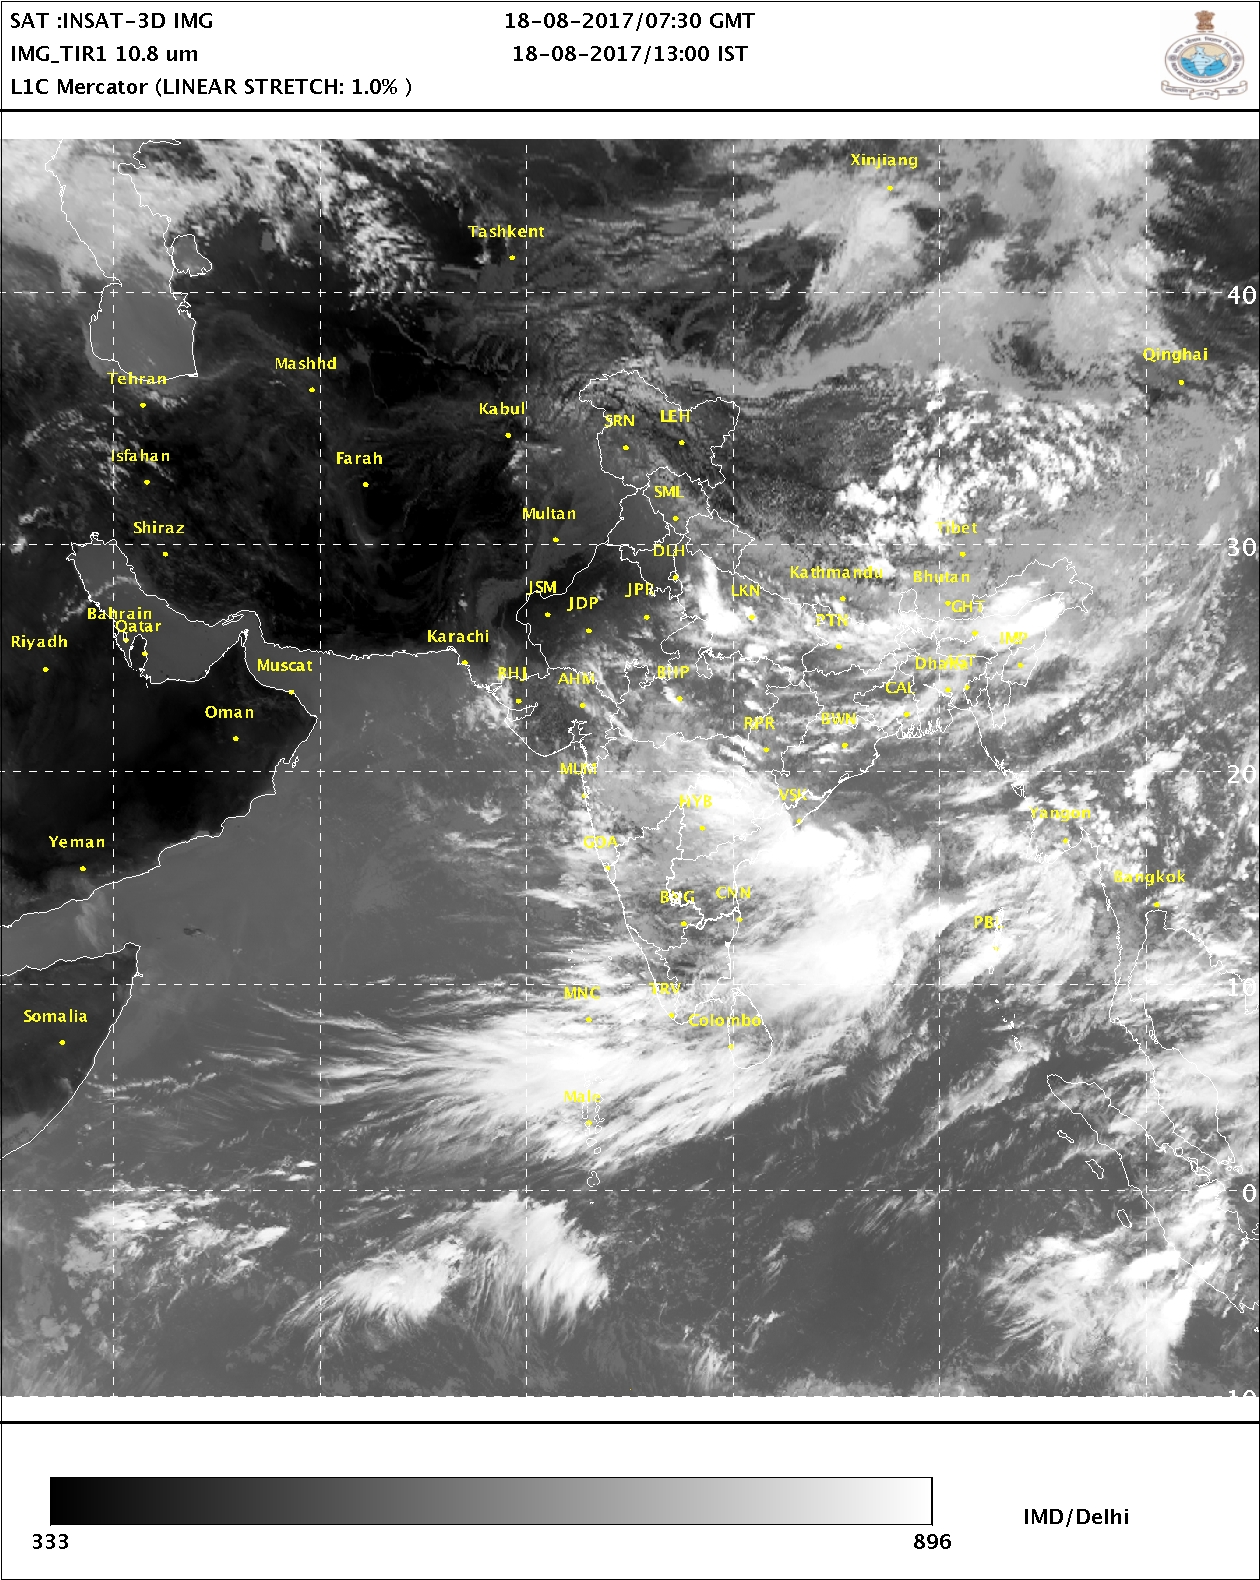 Satellite picture 18th August 2017 1300 hrs IST